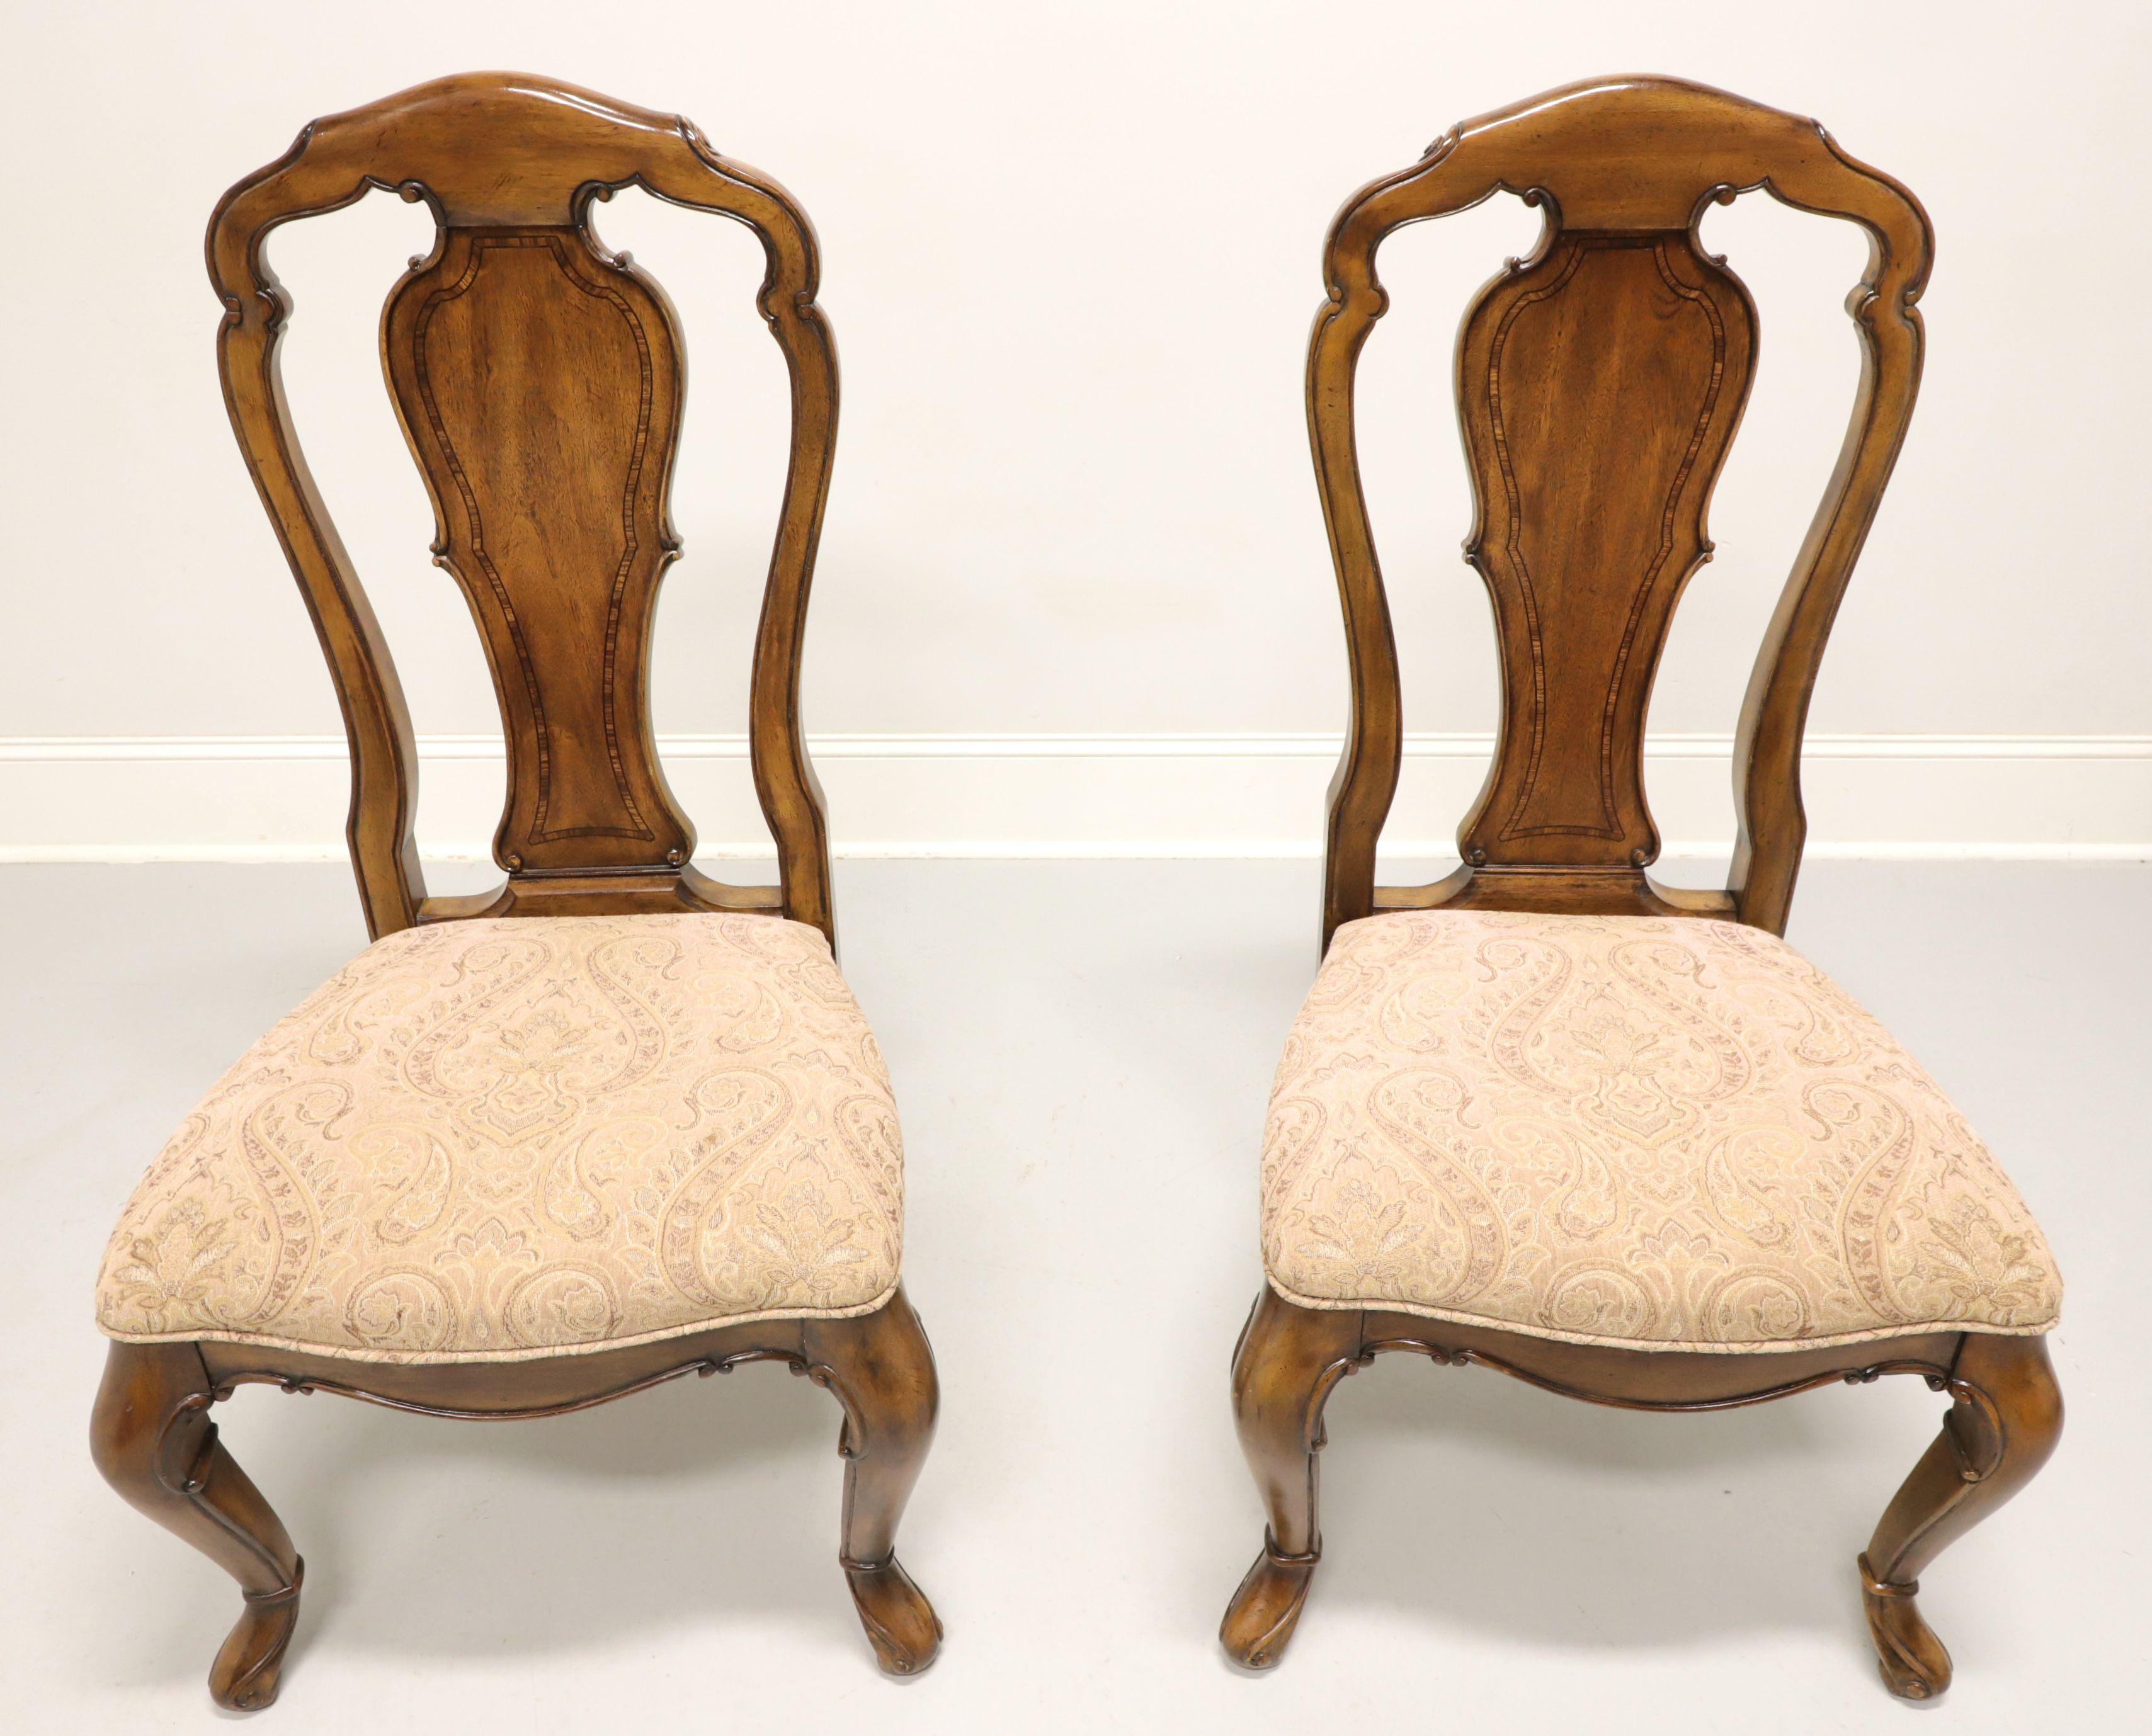 A pair of Spanish Mediterranean style dining side chairs by Thomasville, their Granada from the Ernest Hemingway Collection. Mahogany with carved crestrail, fiddle backrest, pink/beige/brown paisley pattern fabric upholstered seats, carved apron,